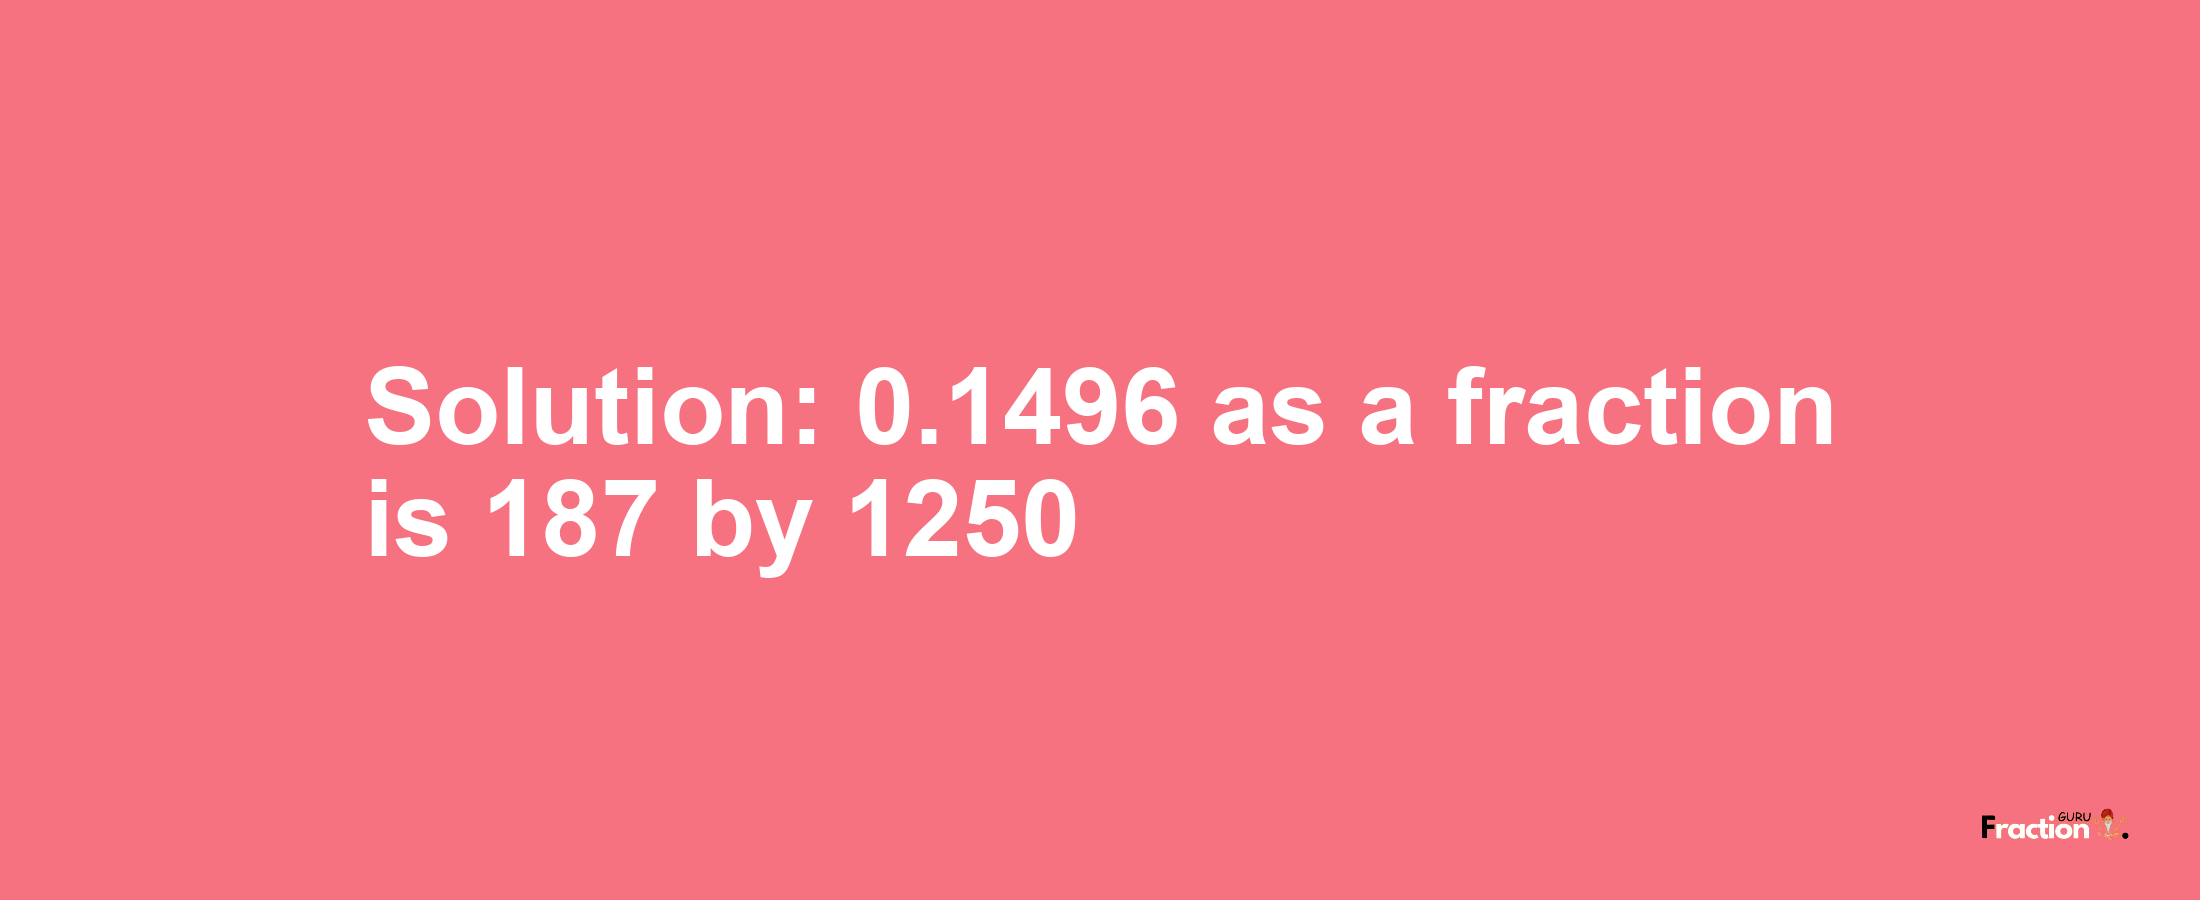 Solution:0.1496 as a fraction is 187/1250